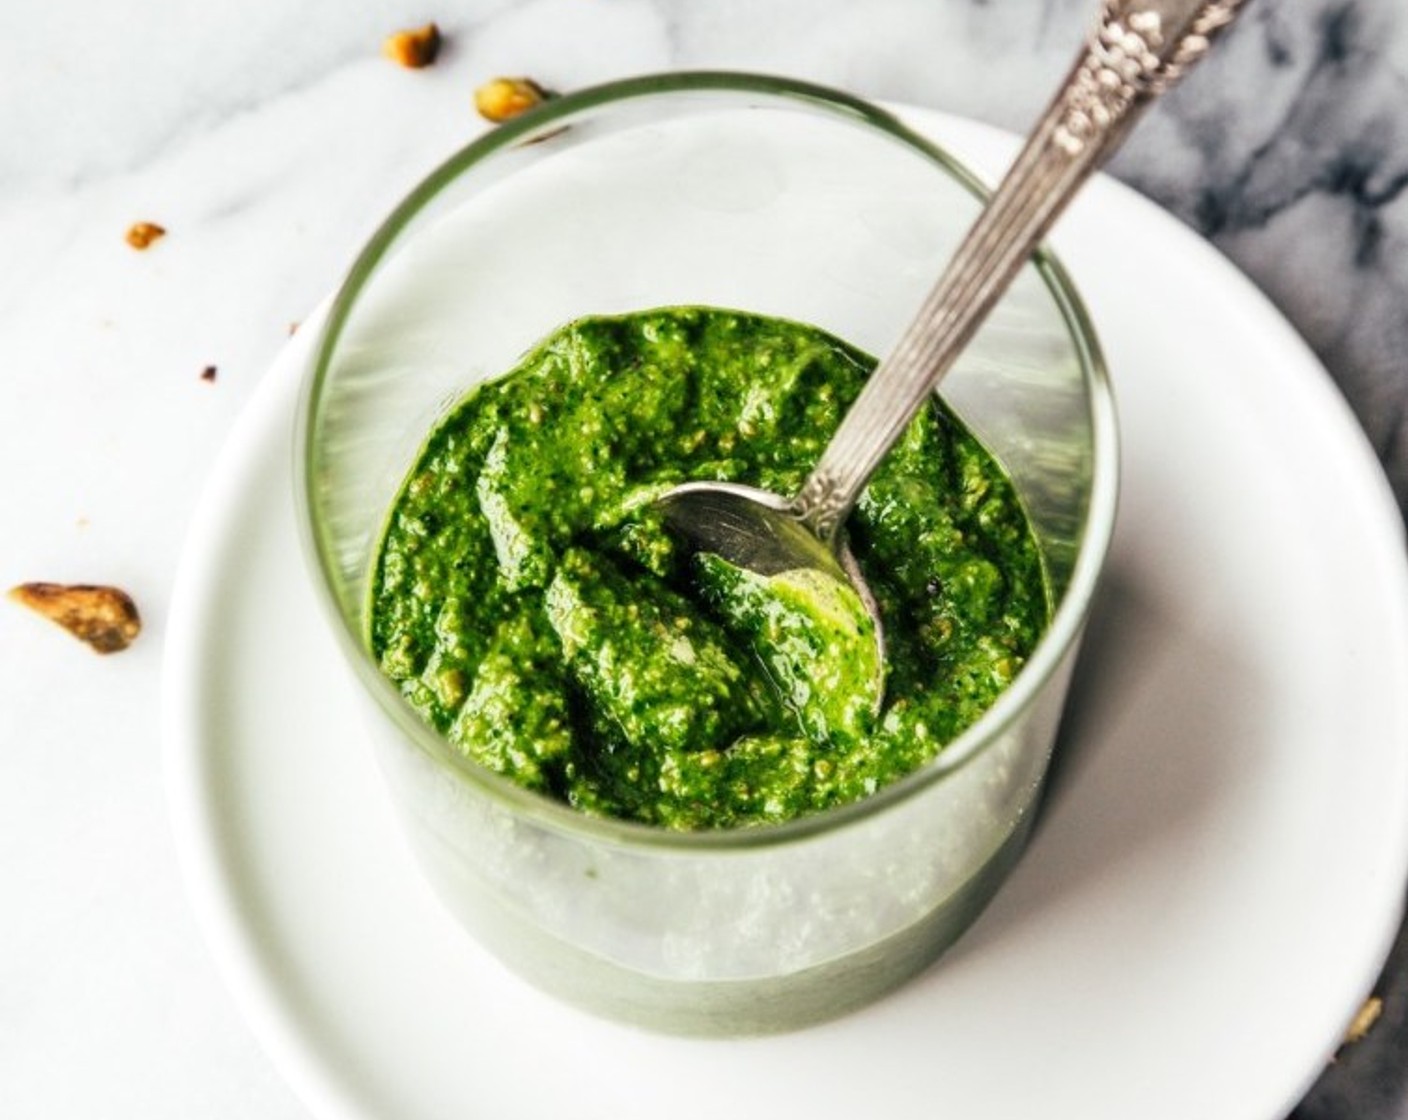 step 4 Add Parmesan Cheese (1/2 cup) and pulse 2 or 3 times. Voila! Pistachio Pesto. Set aside.